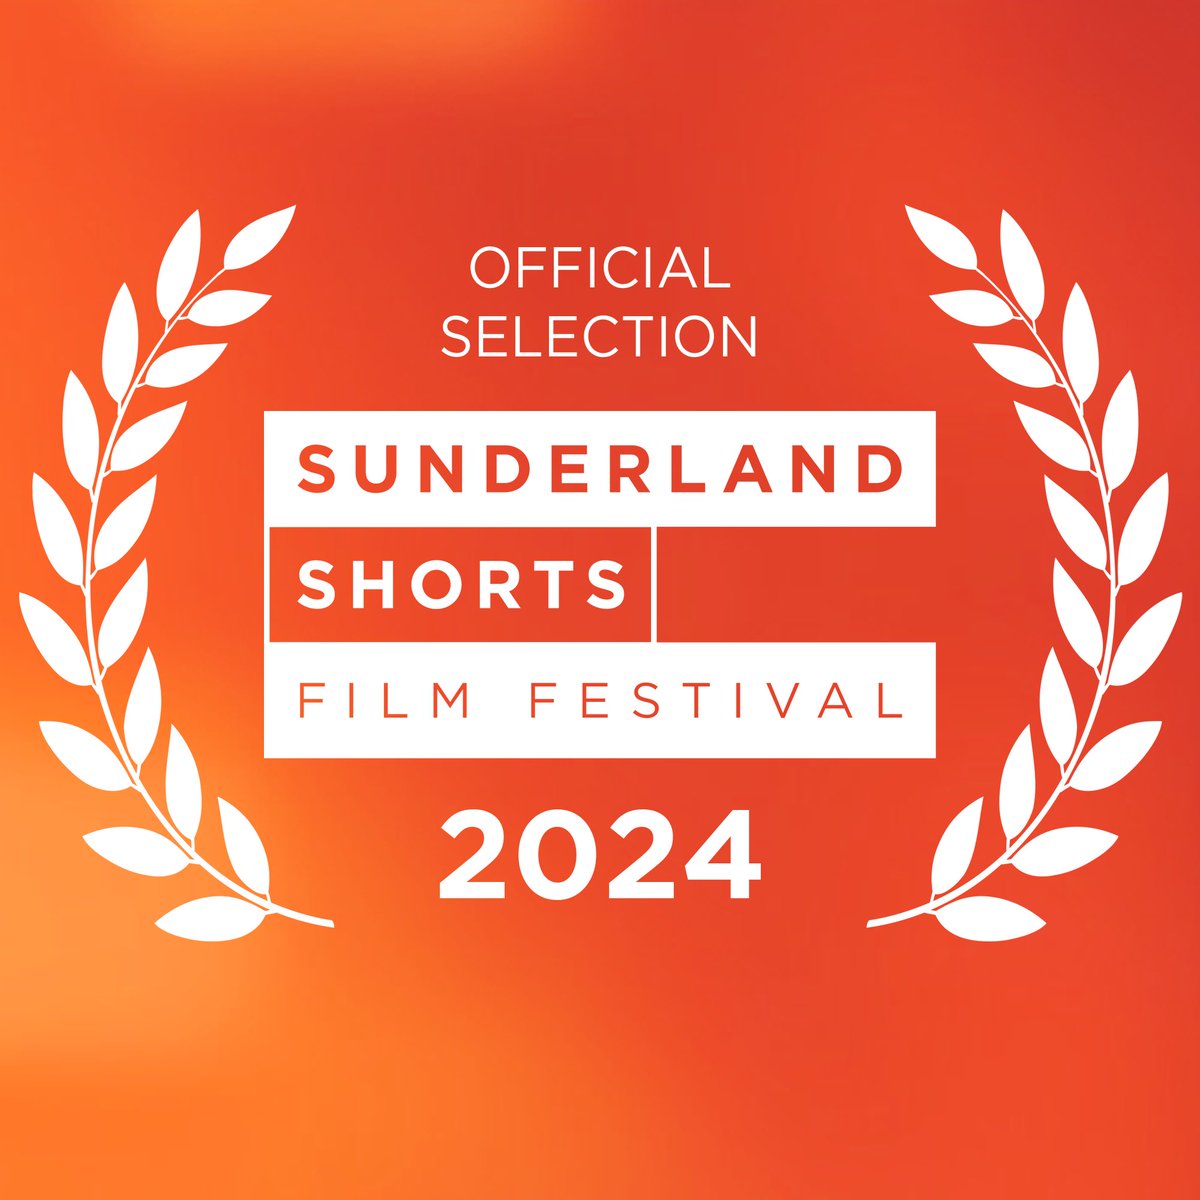 👀 With over 150 short films and music videos we’ve got something for everyone from filmmakers and film lovers alike at Sunderland Shorts 2024! Check out the full line-up now & we look forward to seeing you this May -> sunderlandshorts.co.uk/ssff2024/ #SSFF24